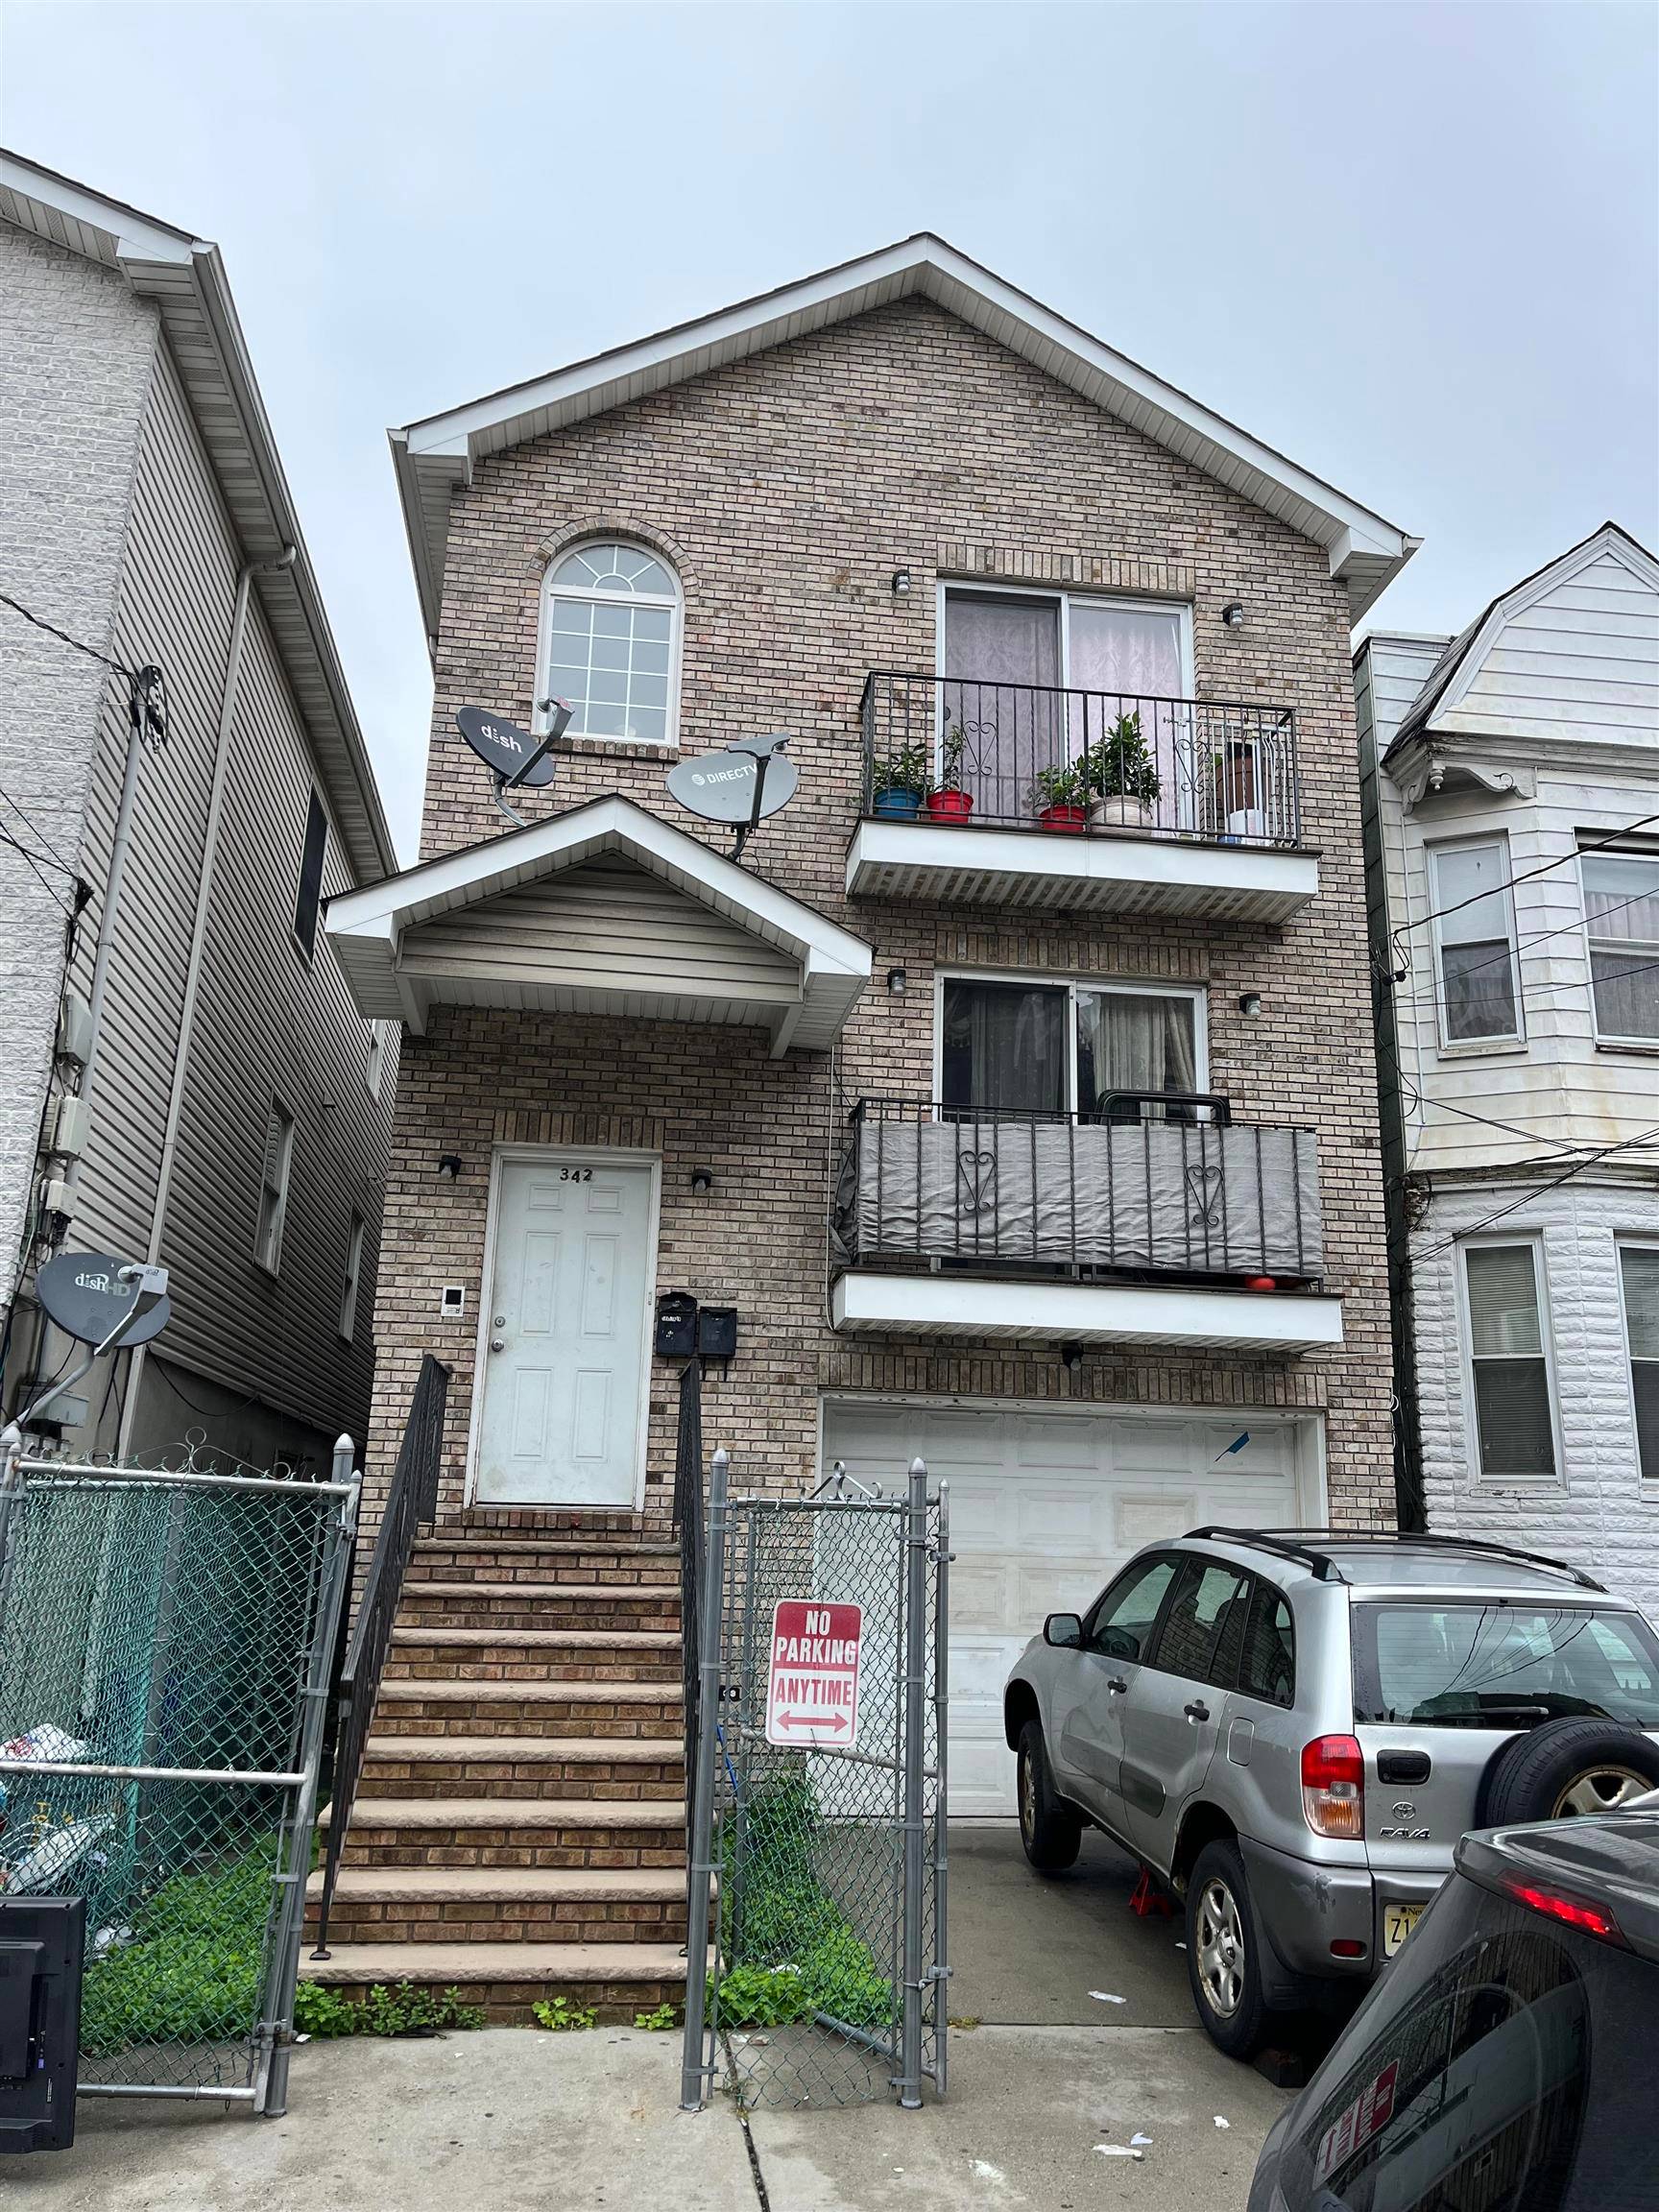 342 FORREST ST Multi-Family New Jersey